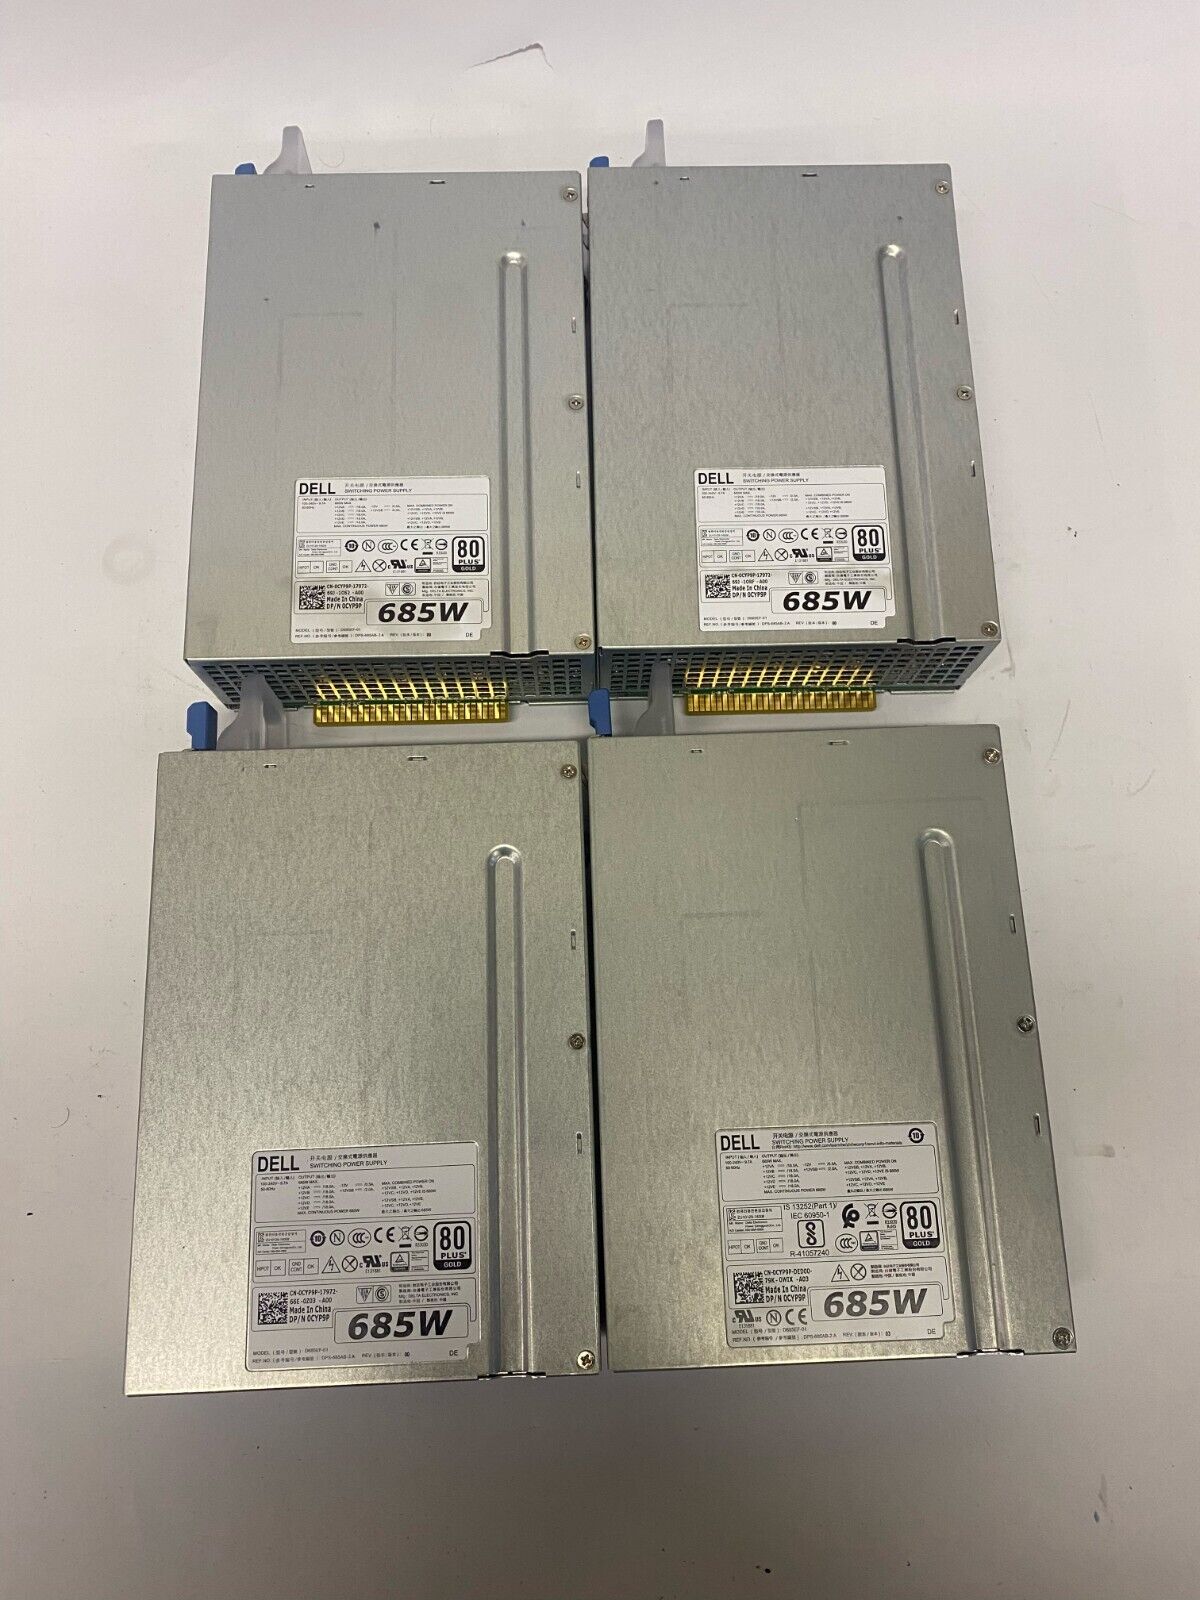 Used Lot of 4 Dell Hot Swap 685W  Server Power Supply